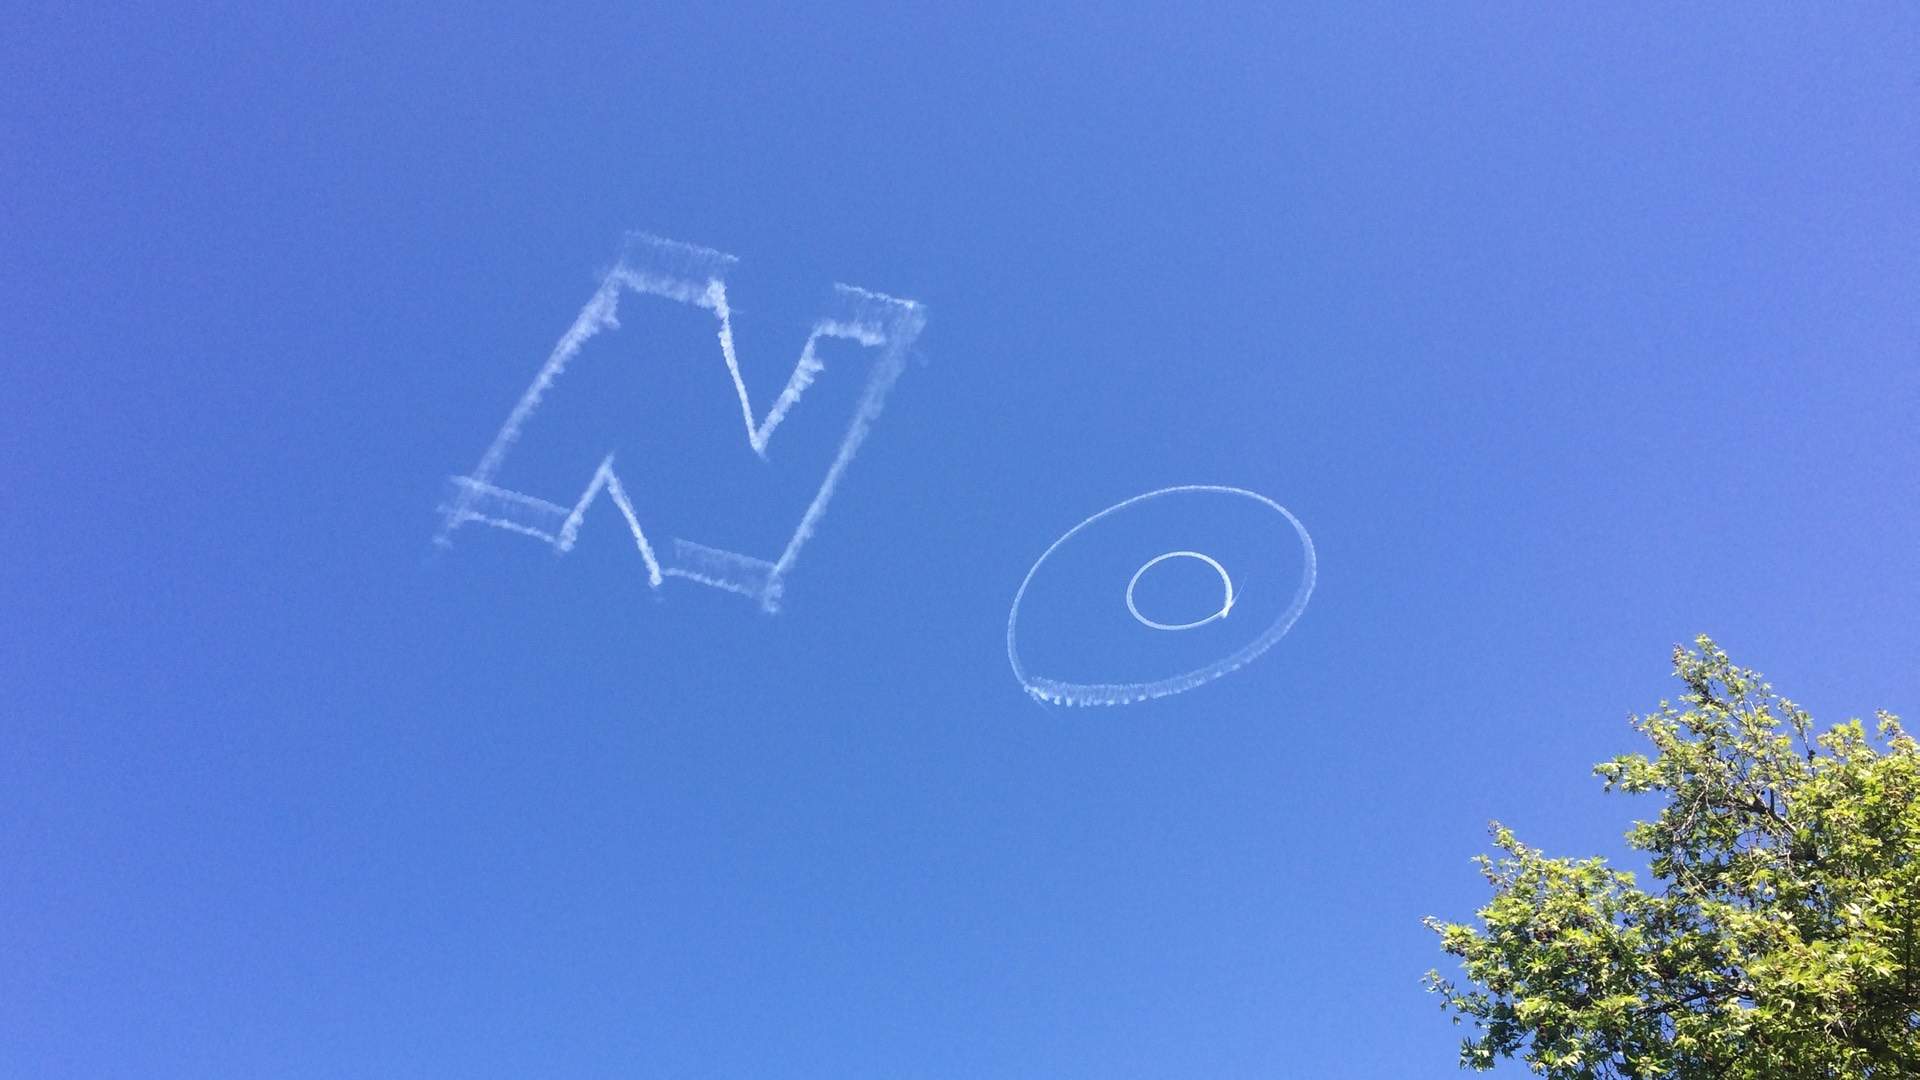 Someone Wrote a Huge 'No' in the Sky Above Melbourne Today